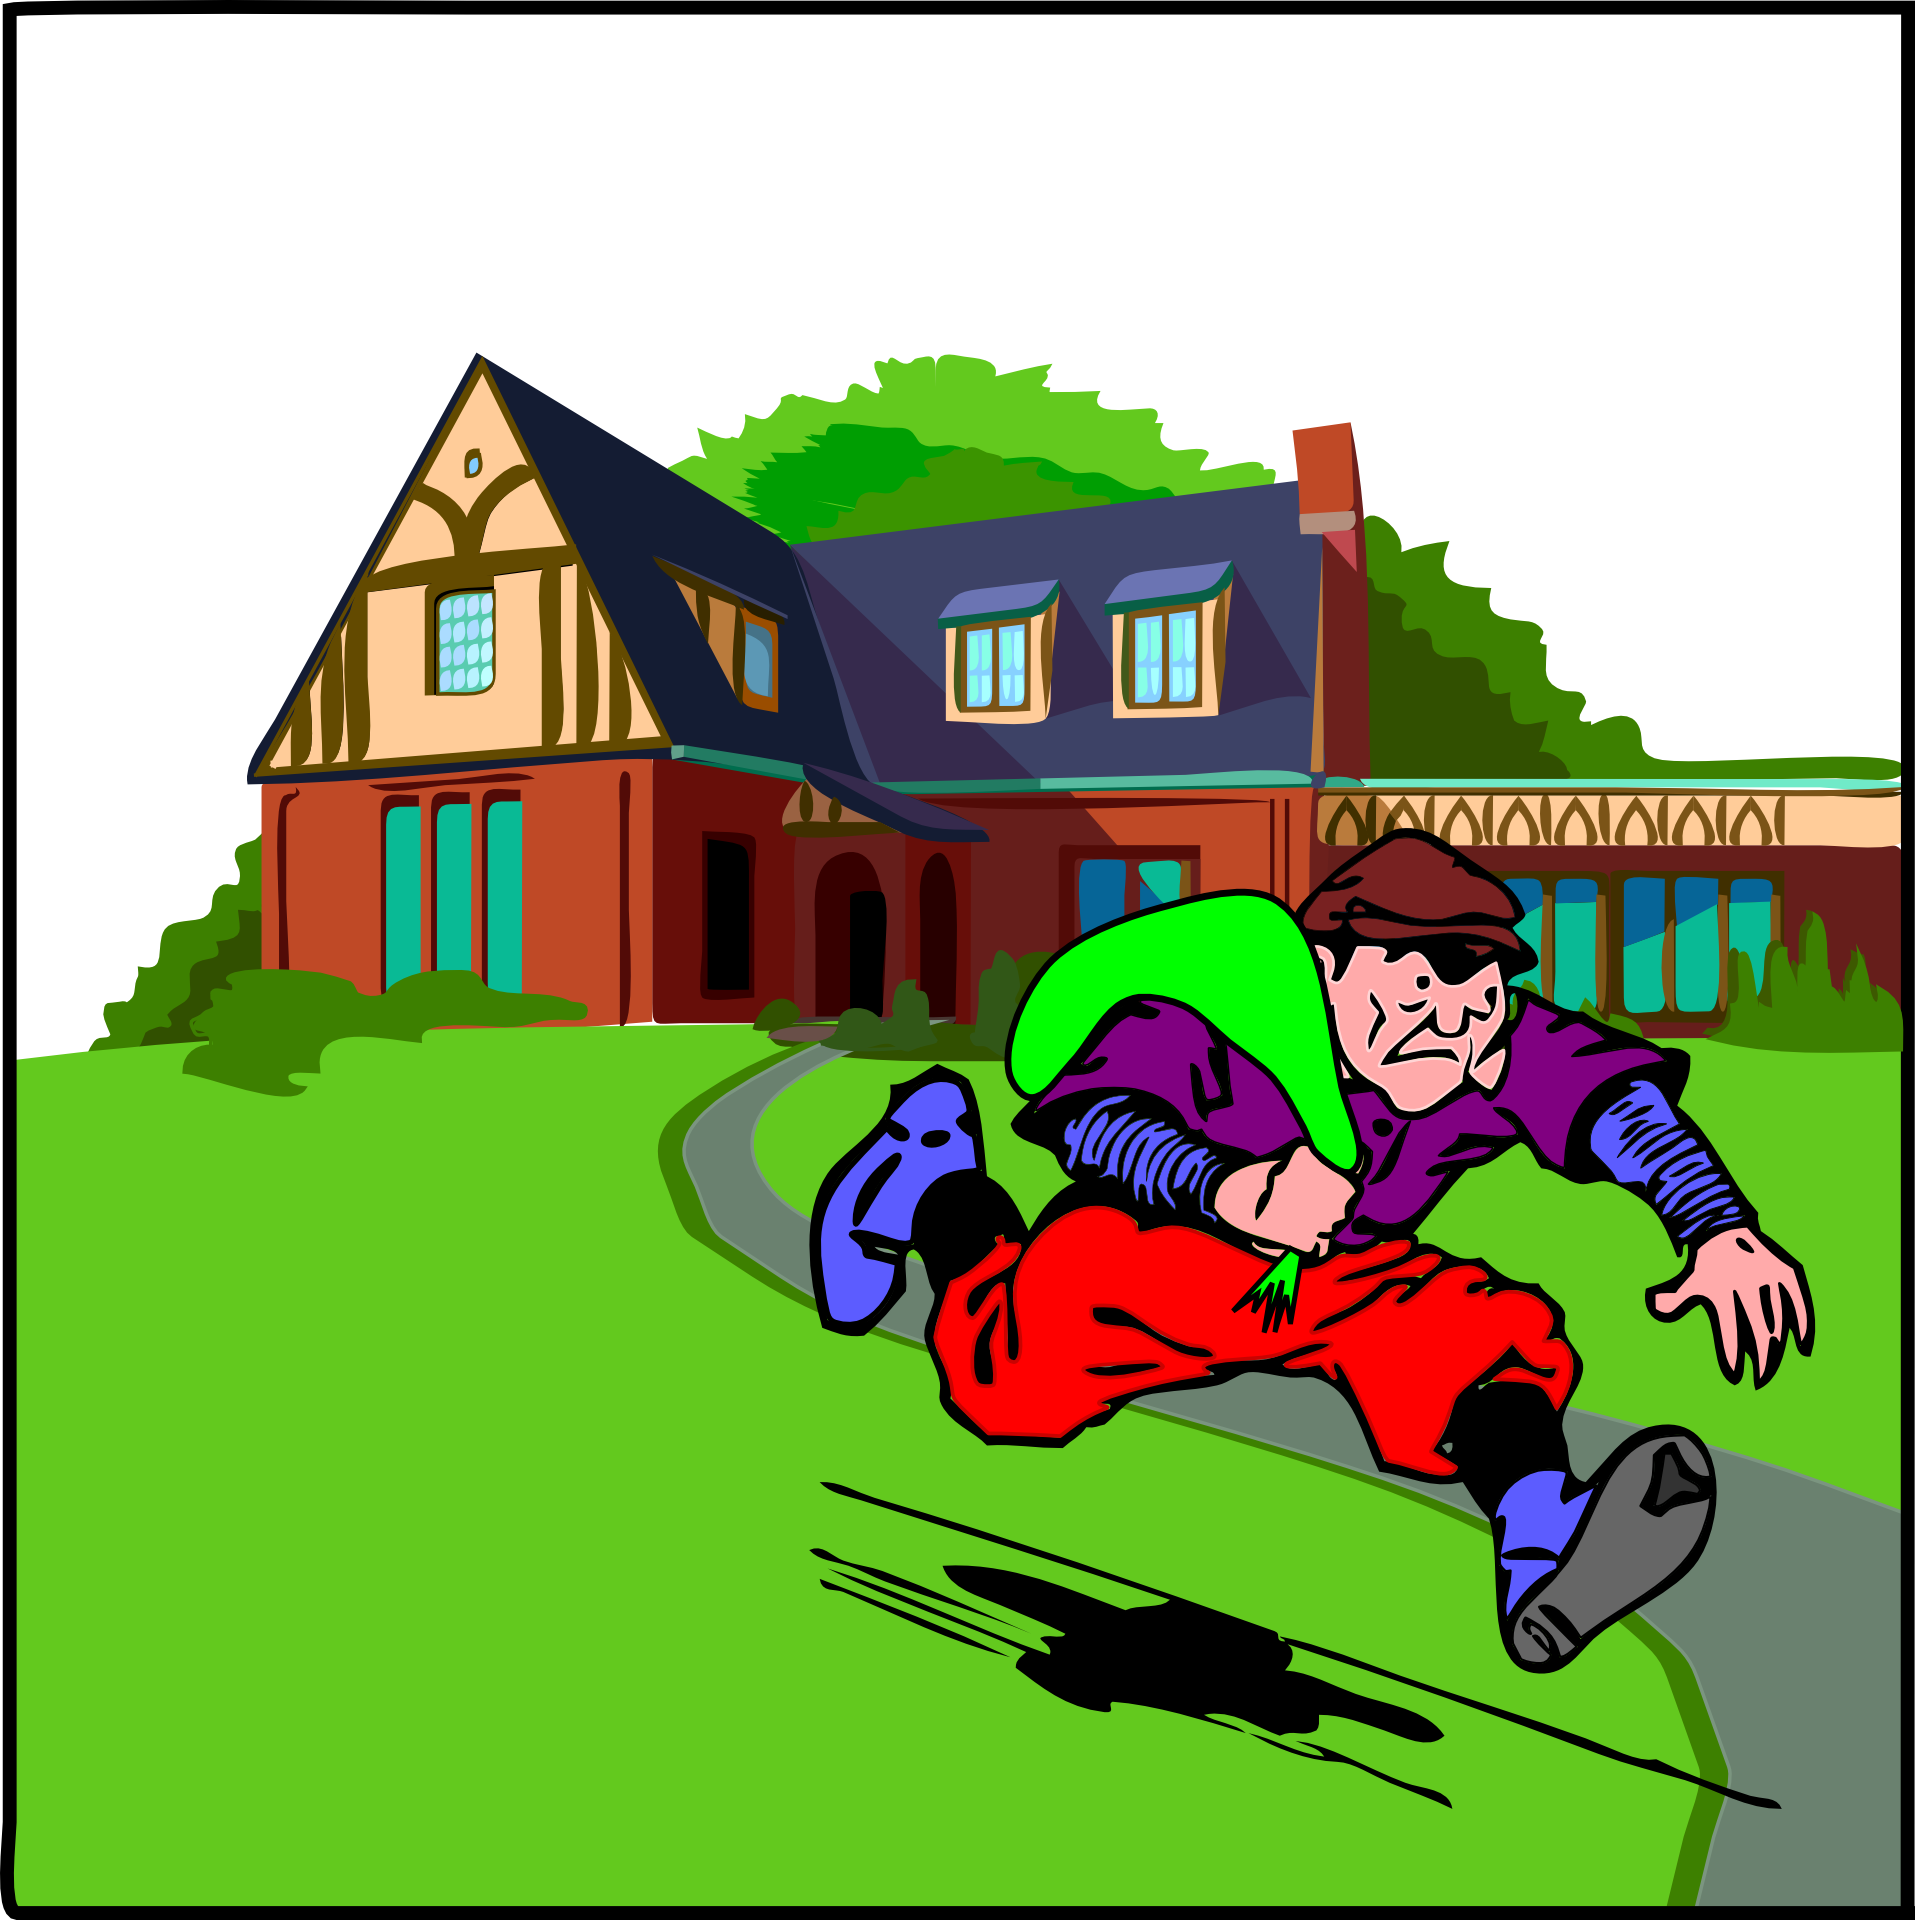 Thief robbed big house and running away clipart free image